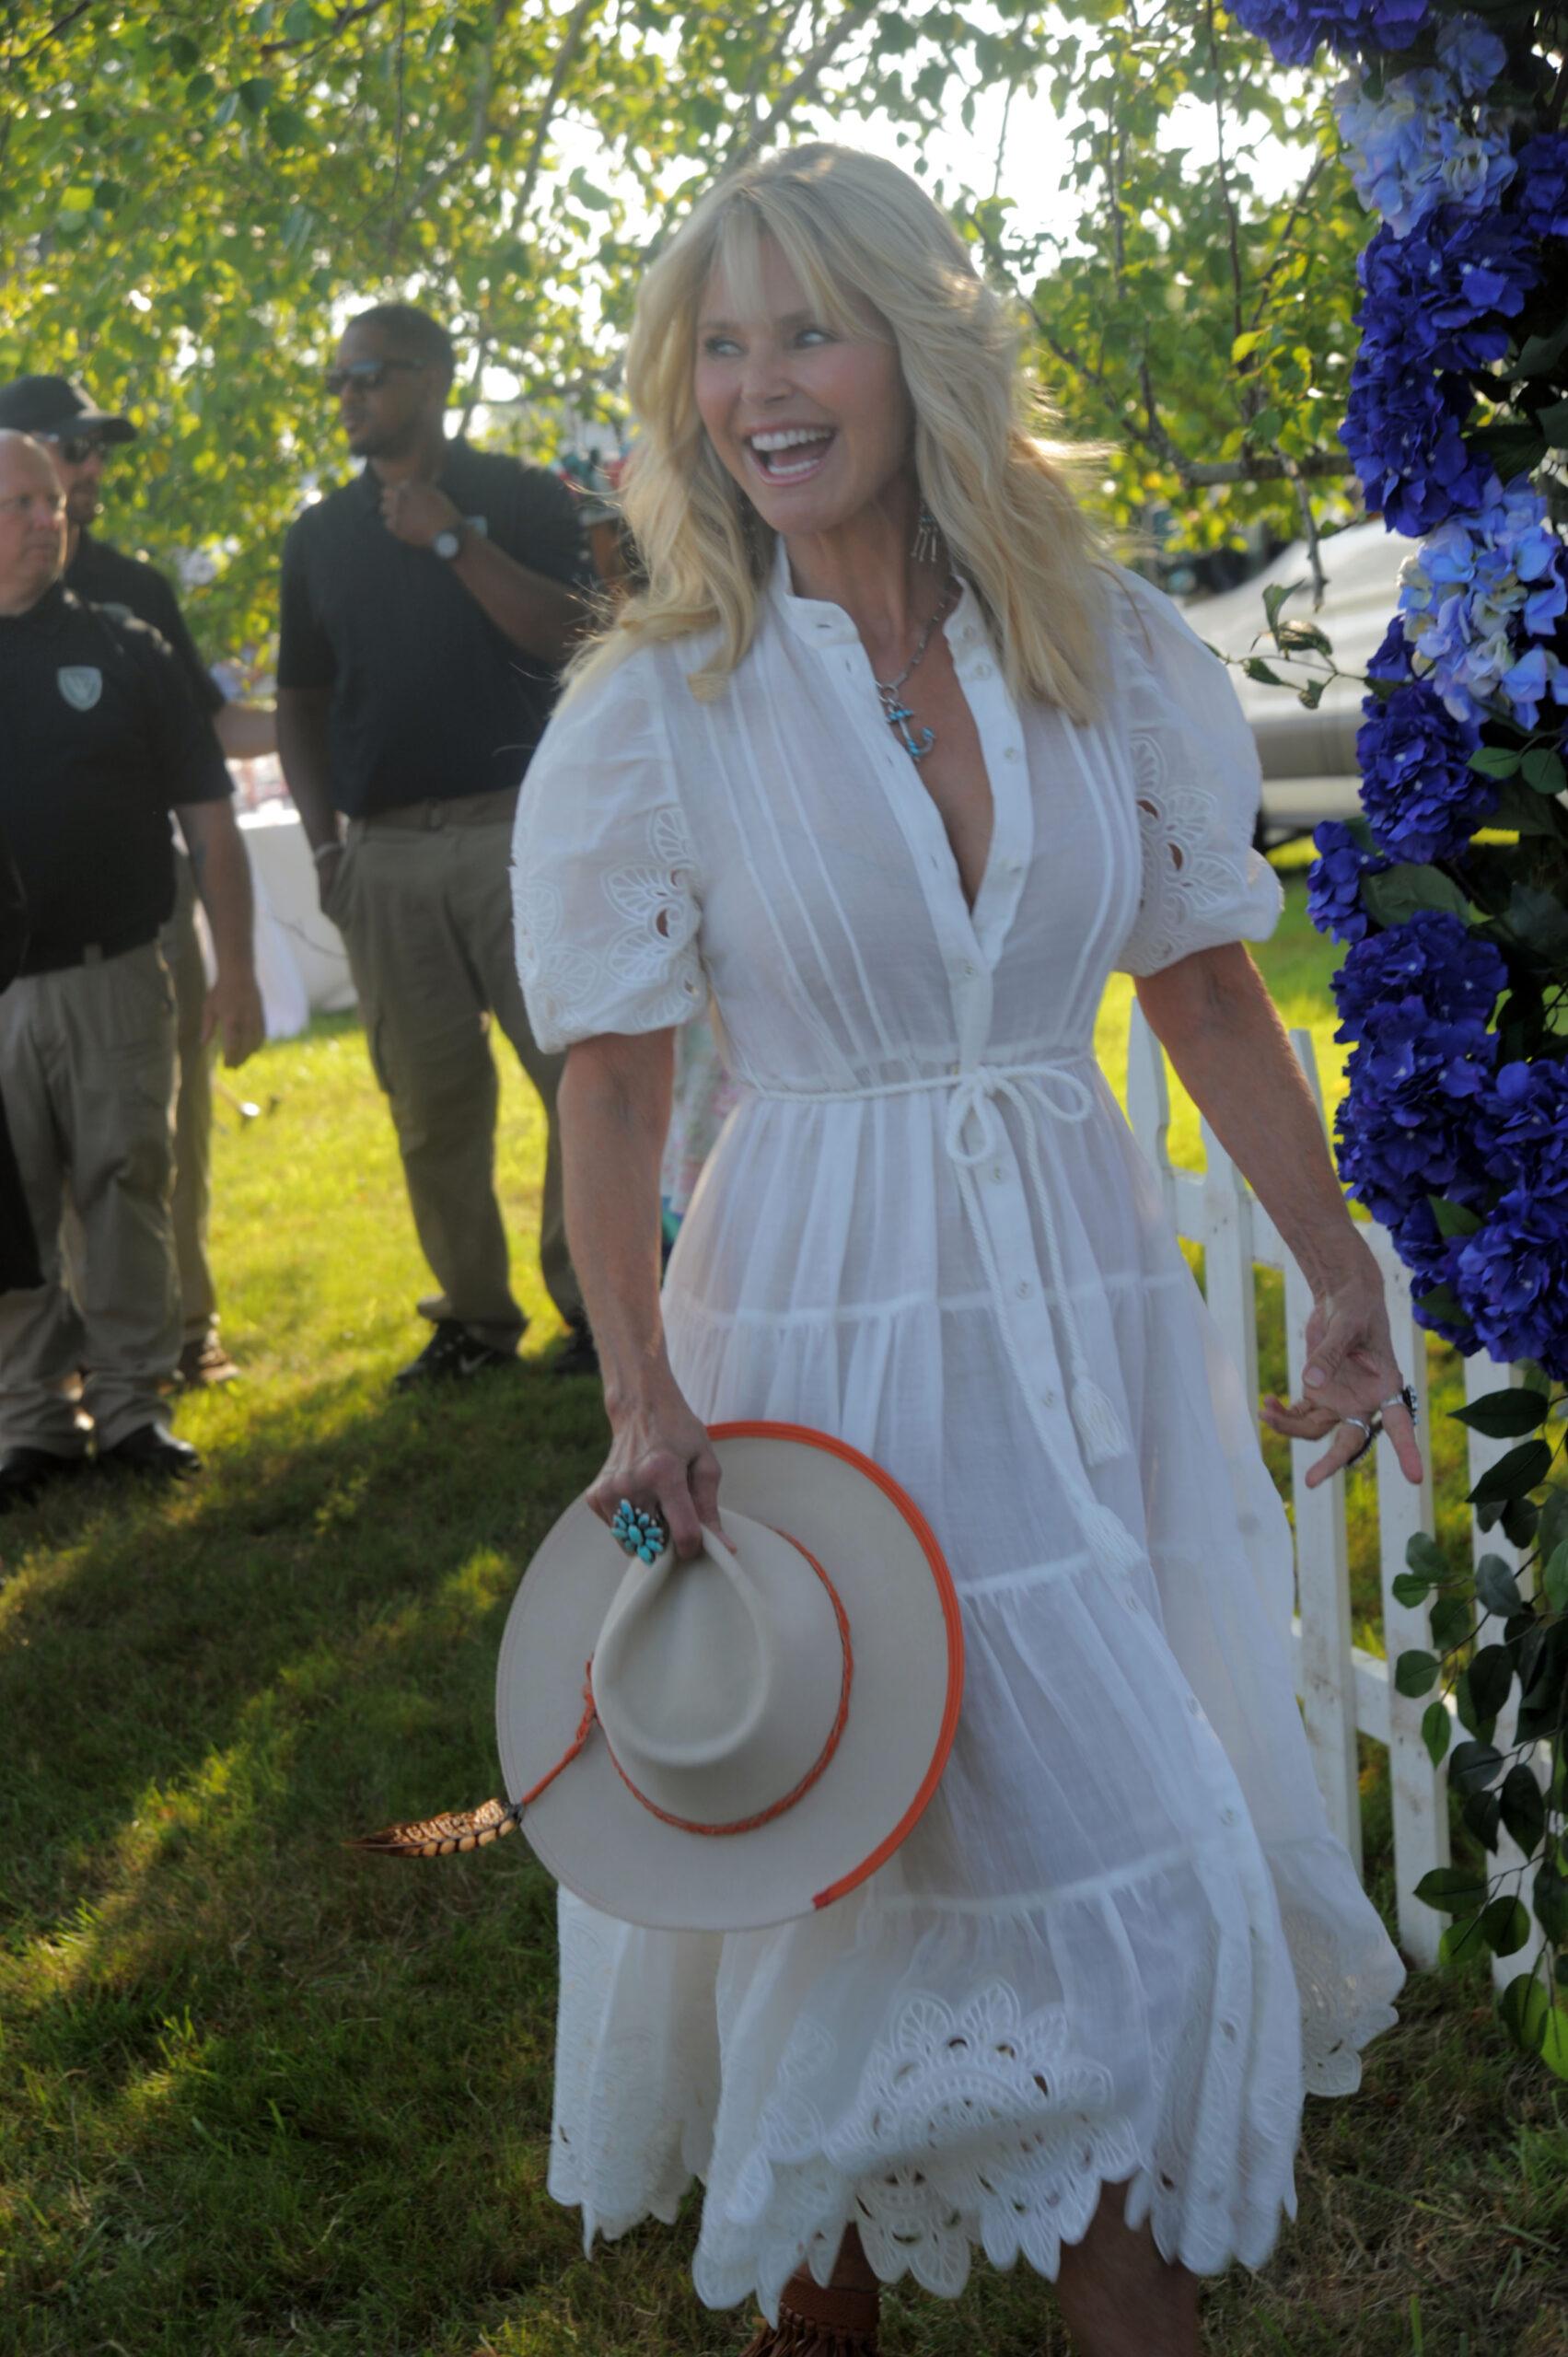 Christie Brinkley 67 showcases her age-defying beauty and chic style in sheer white dress as she attends polo event in The Hamptons